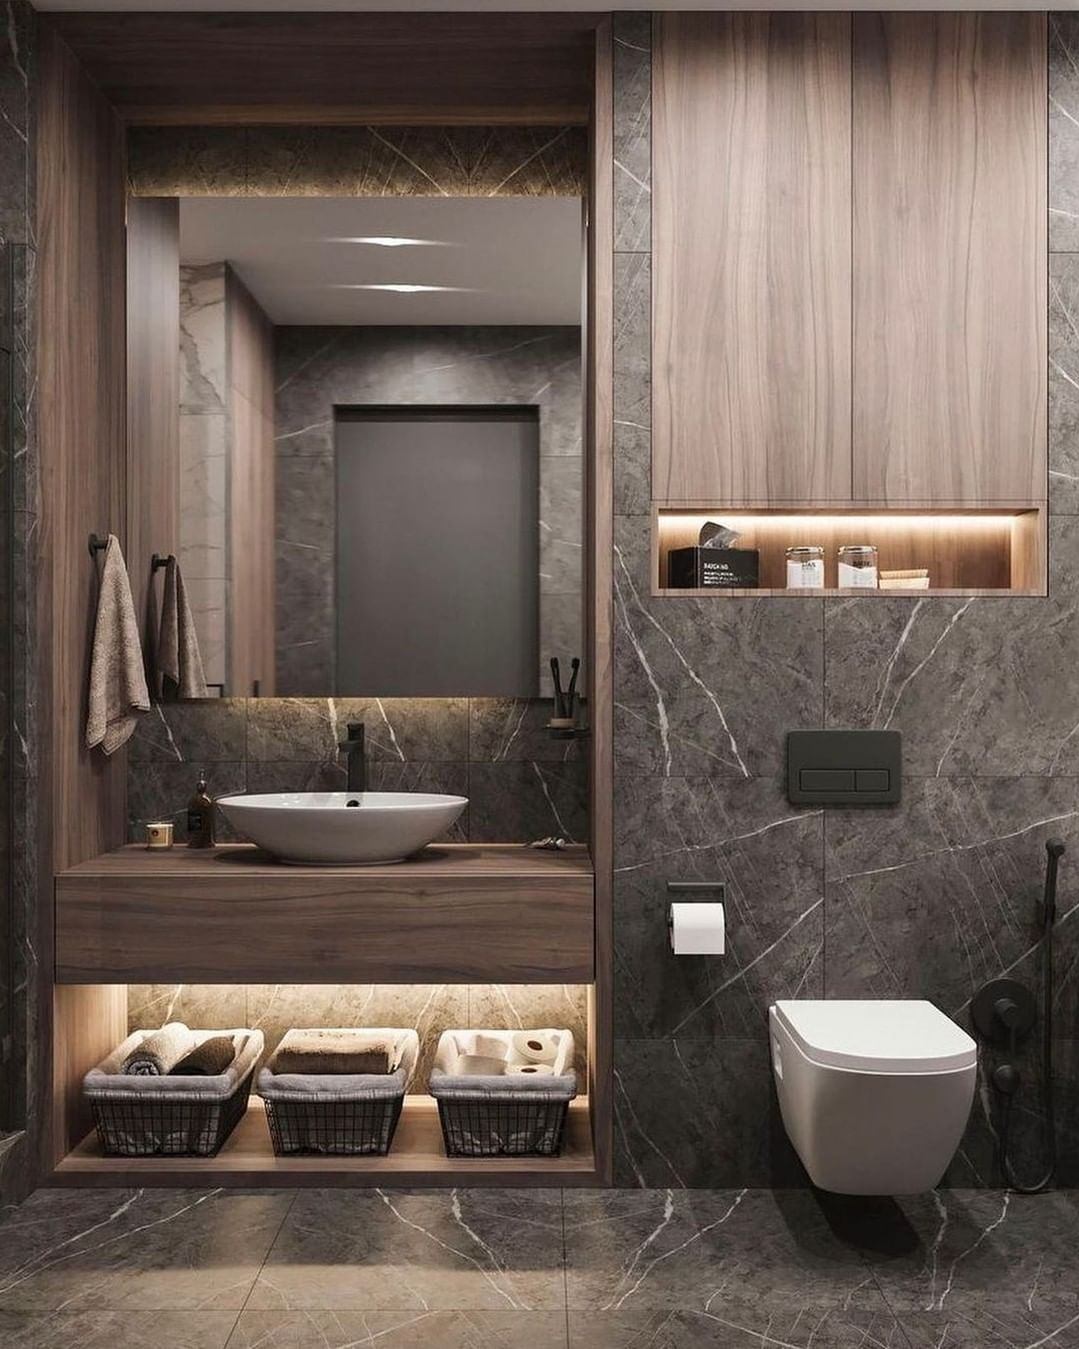 A contemporary bathroom detail that creates a warm and sophisticated atmosphere